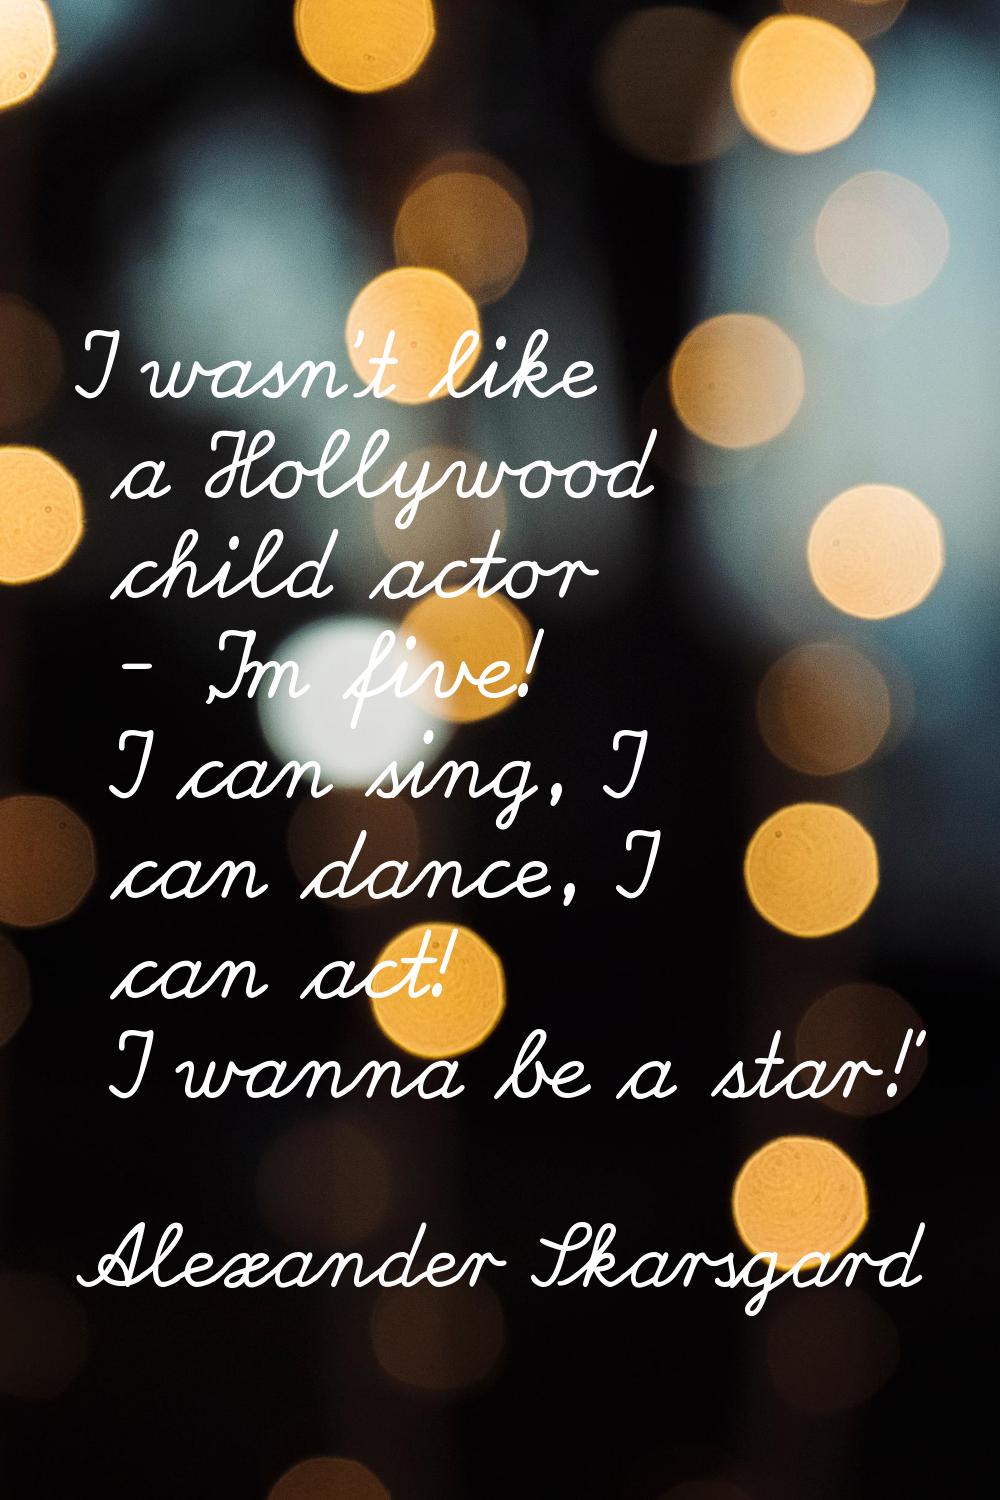 I wasn't like a Hollywood child actor - 'I'm five! I can sing, I can dance, I can act! I wanna be a